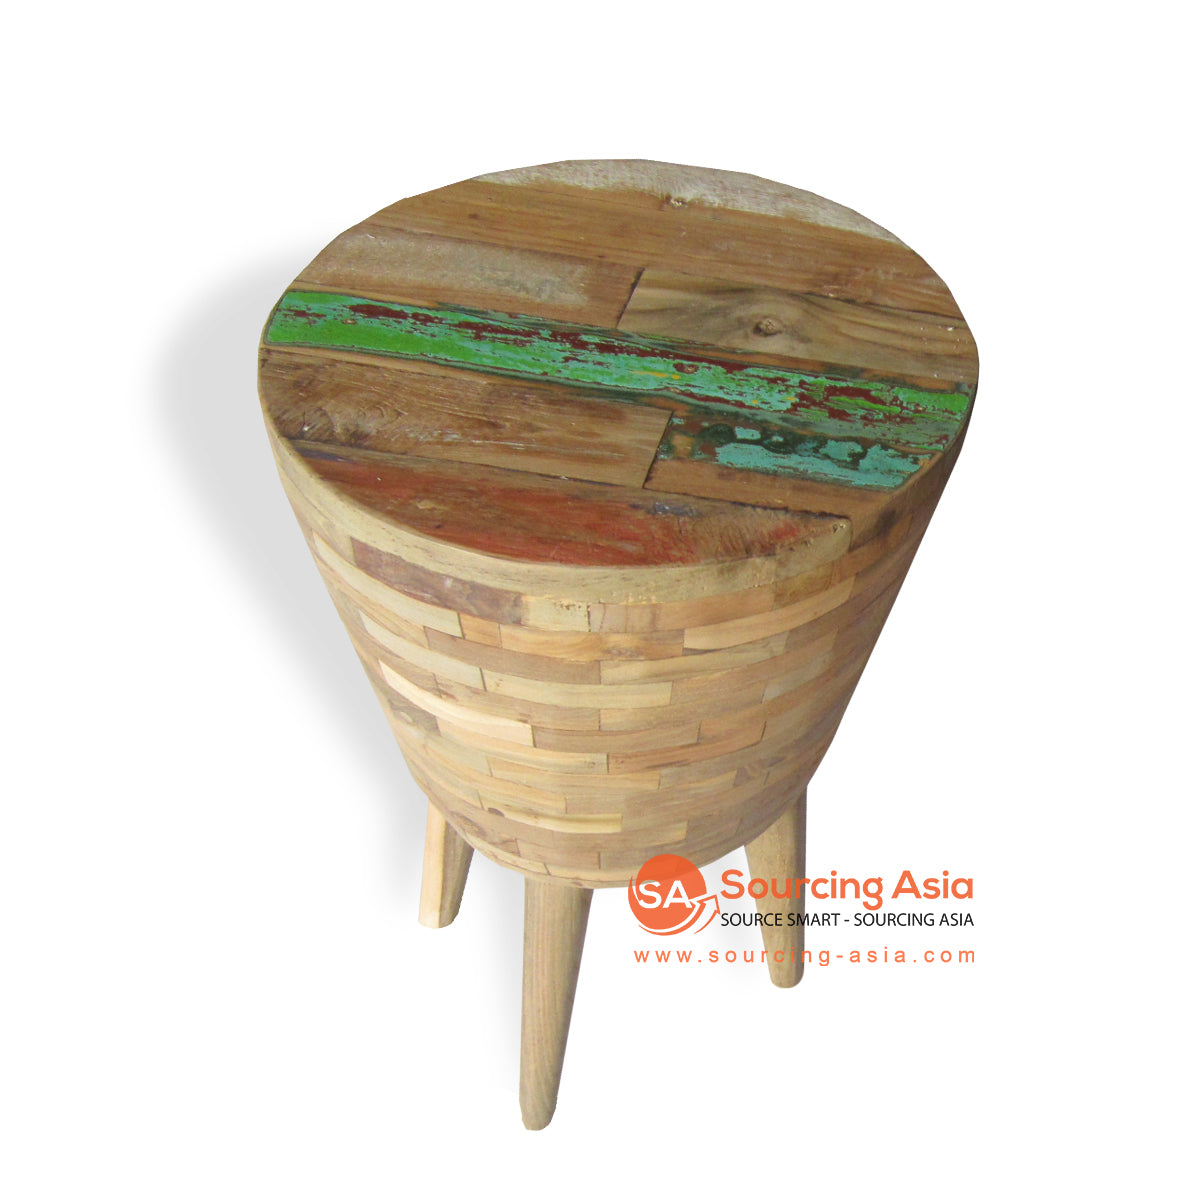 WK231 NATURAL MOZAIC RECYCLED BOAT WOOD STOOL AND SIDE TABLE